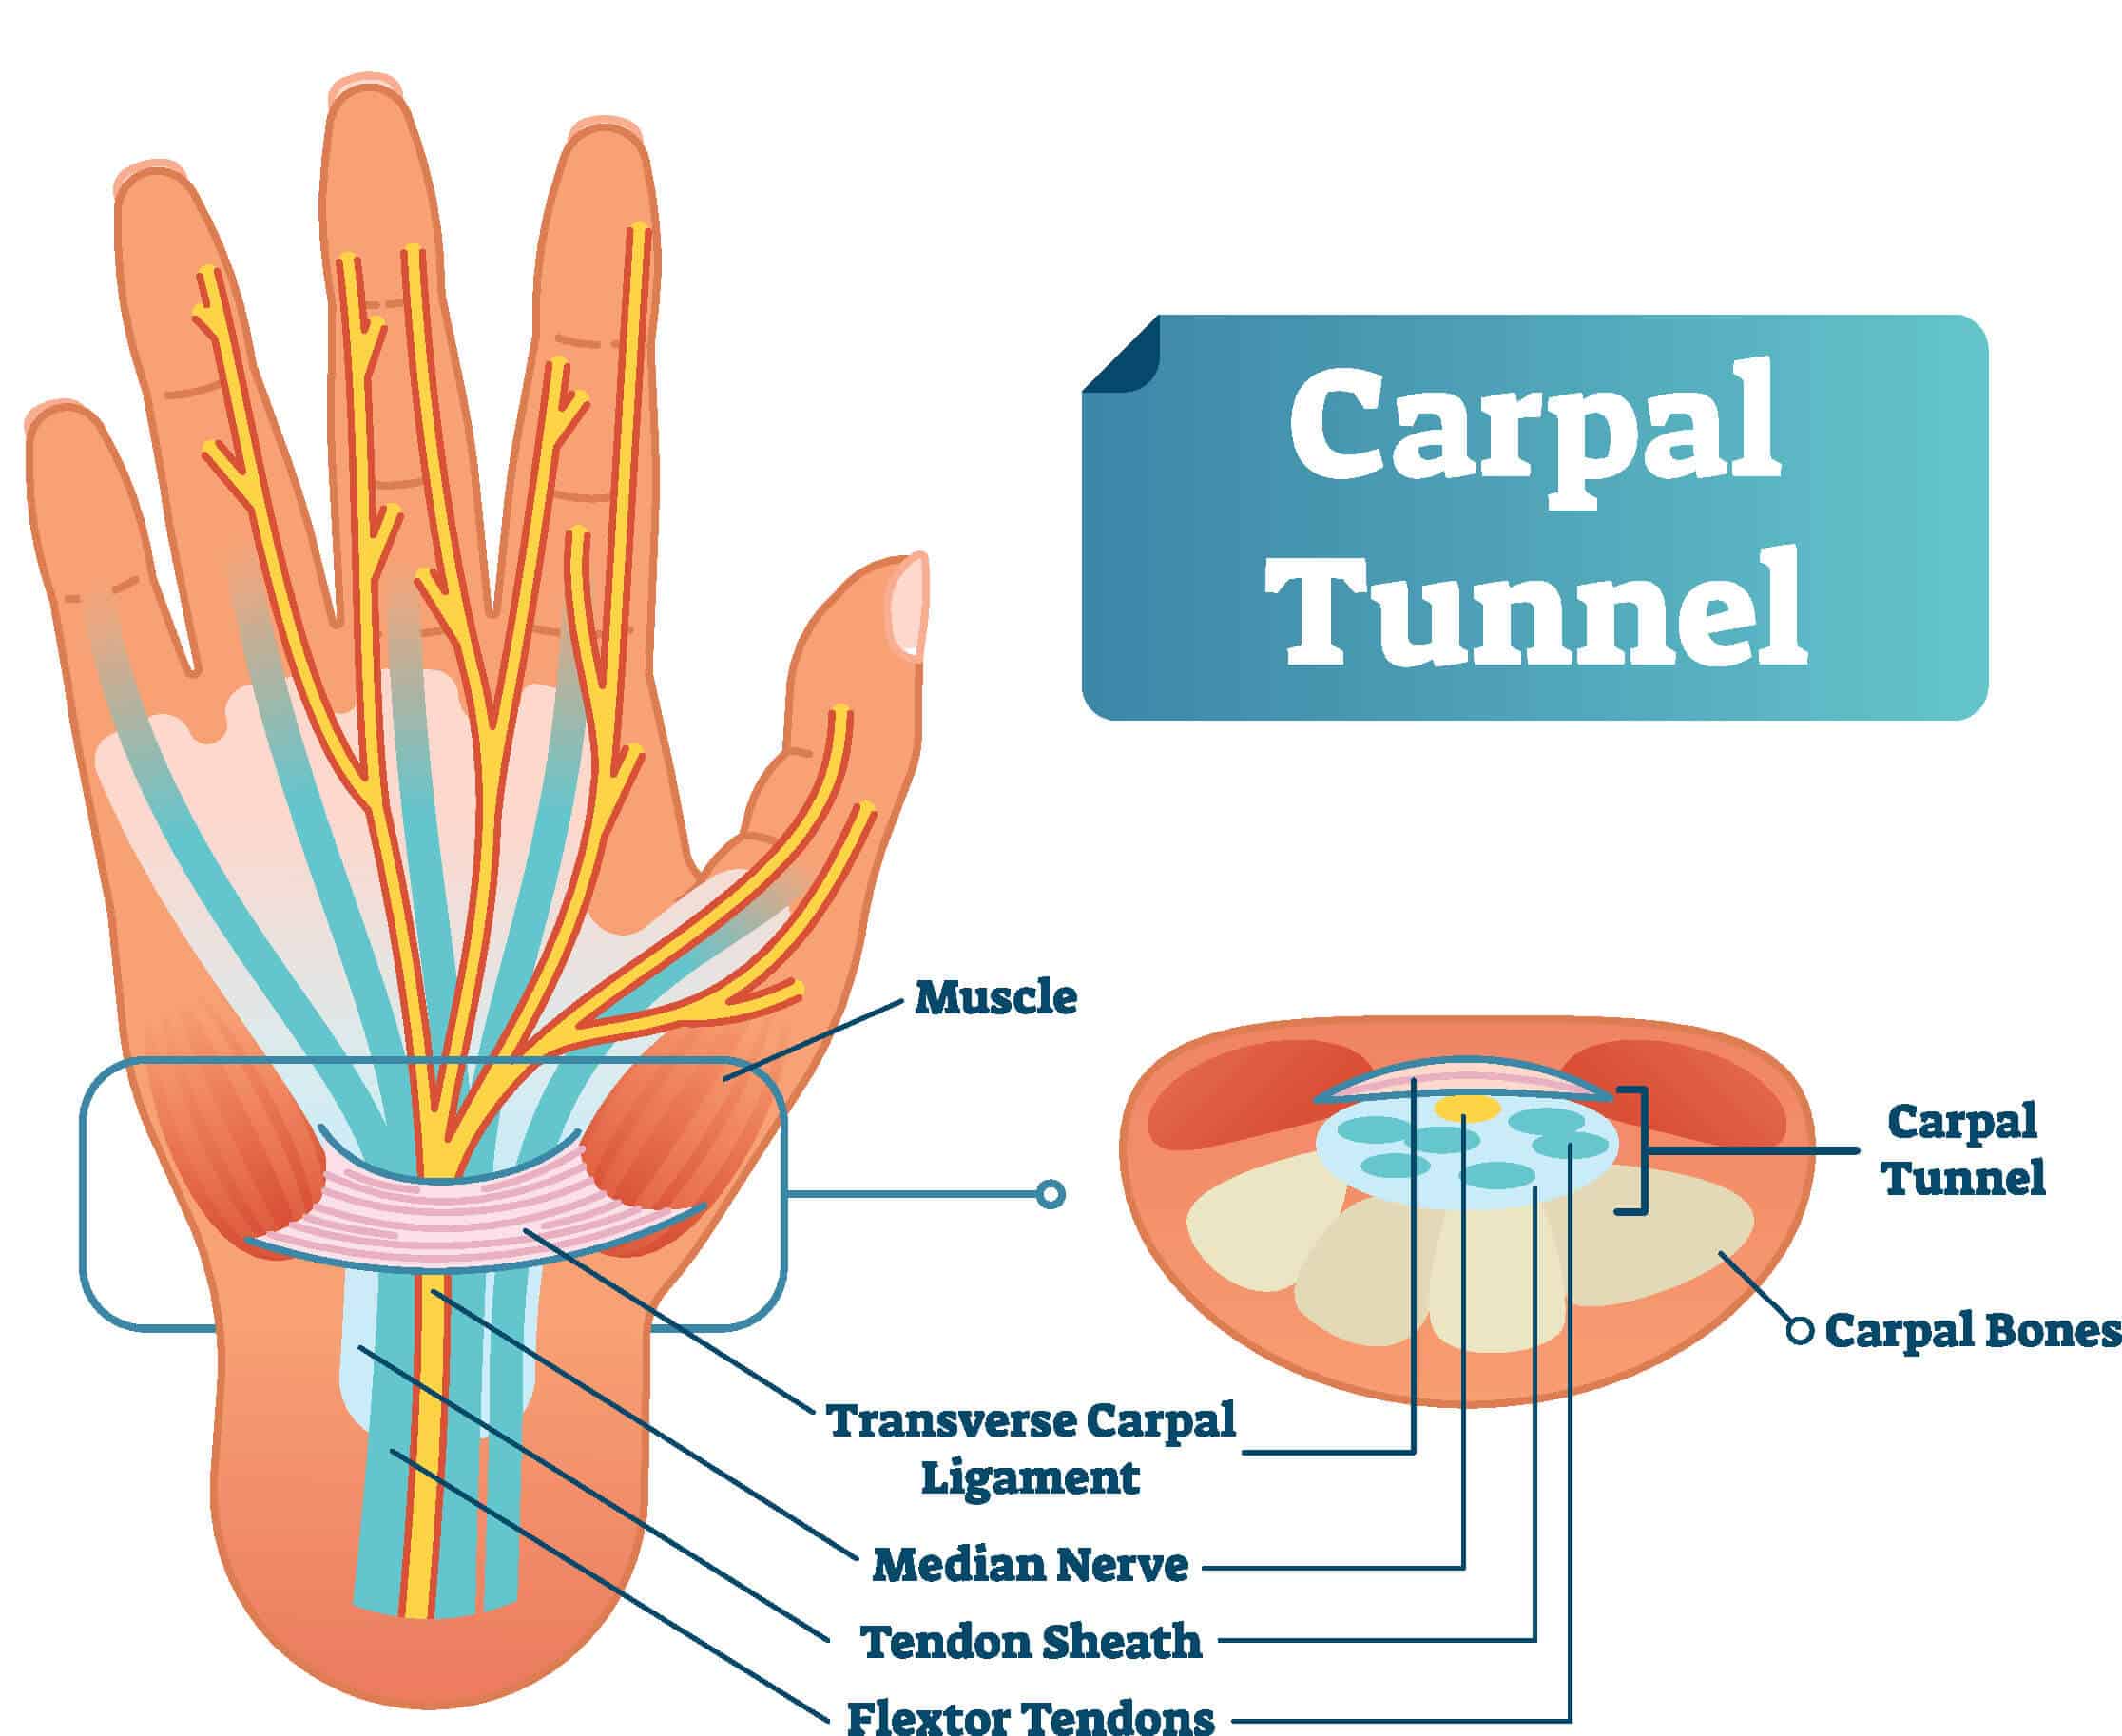 Medical diagram showing the wrist and the pathology of carpal tunnel